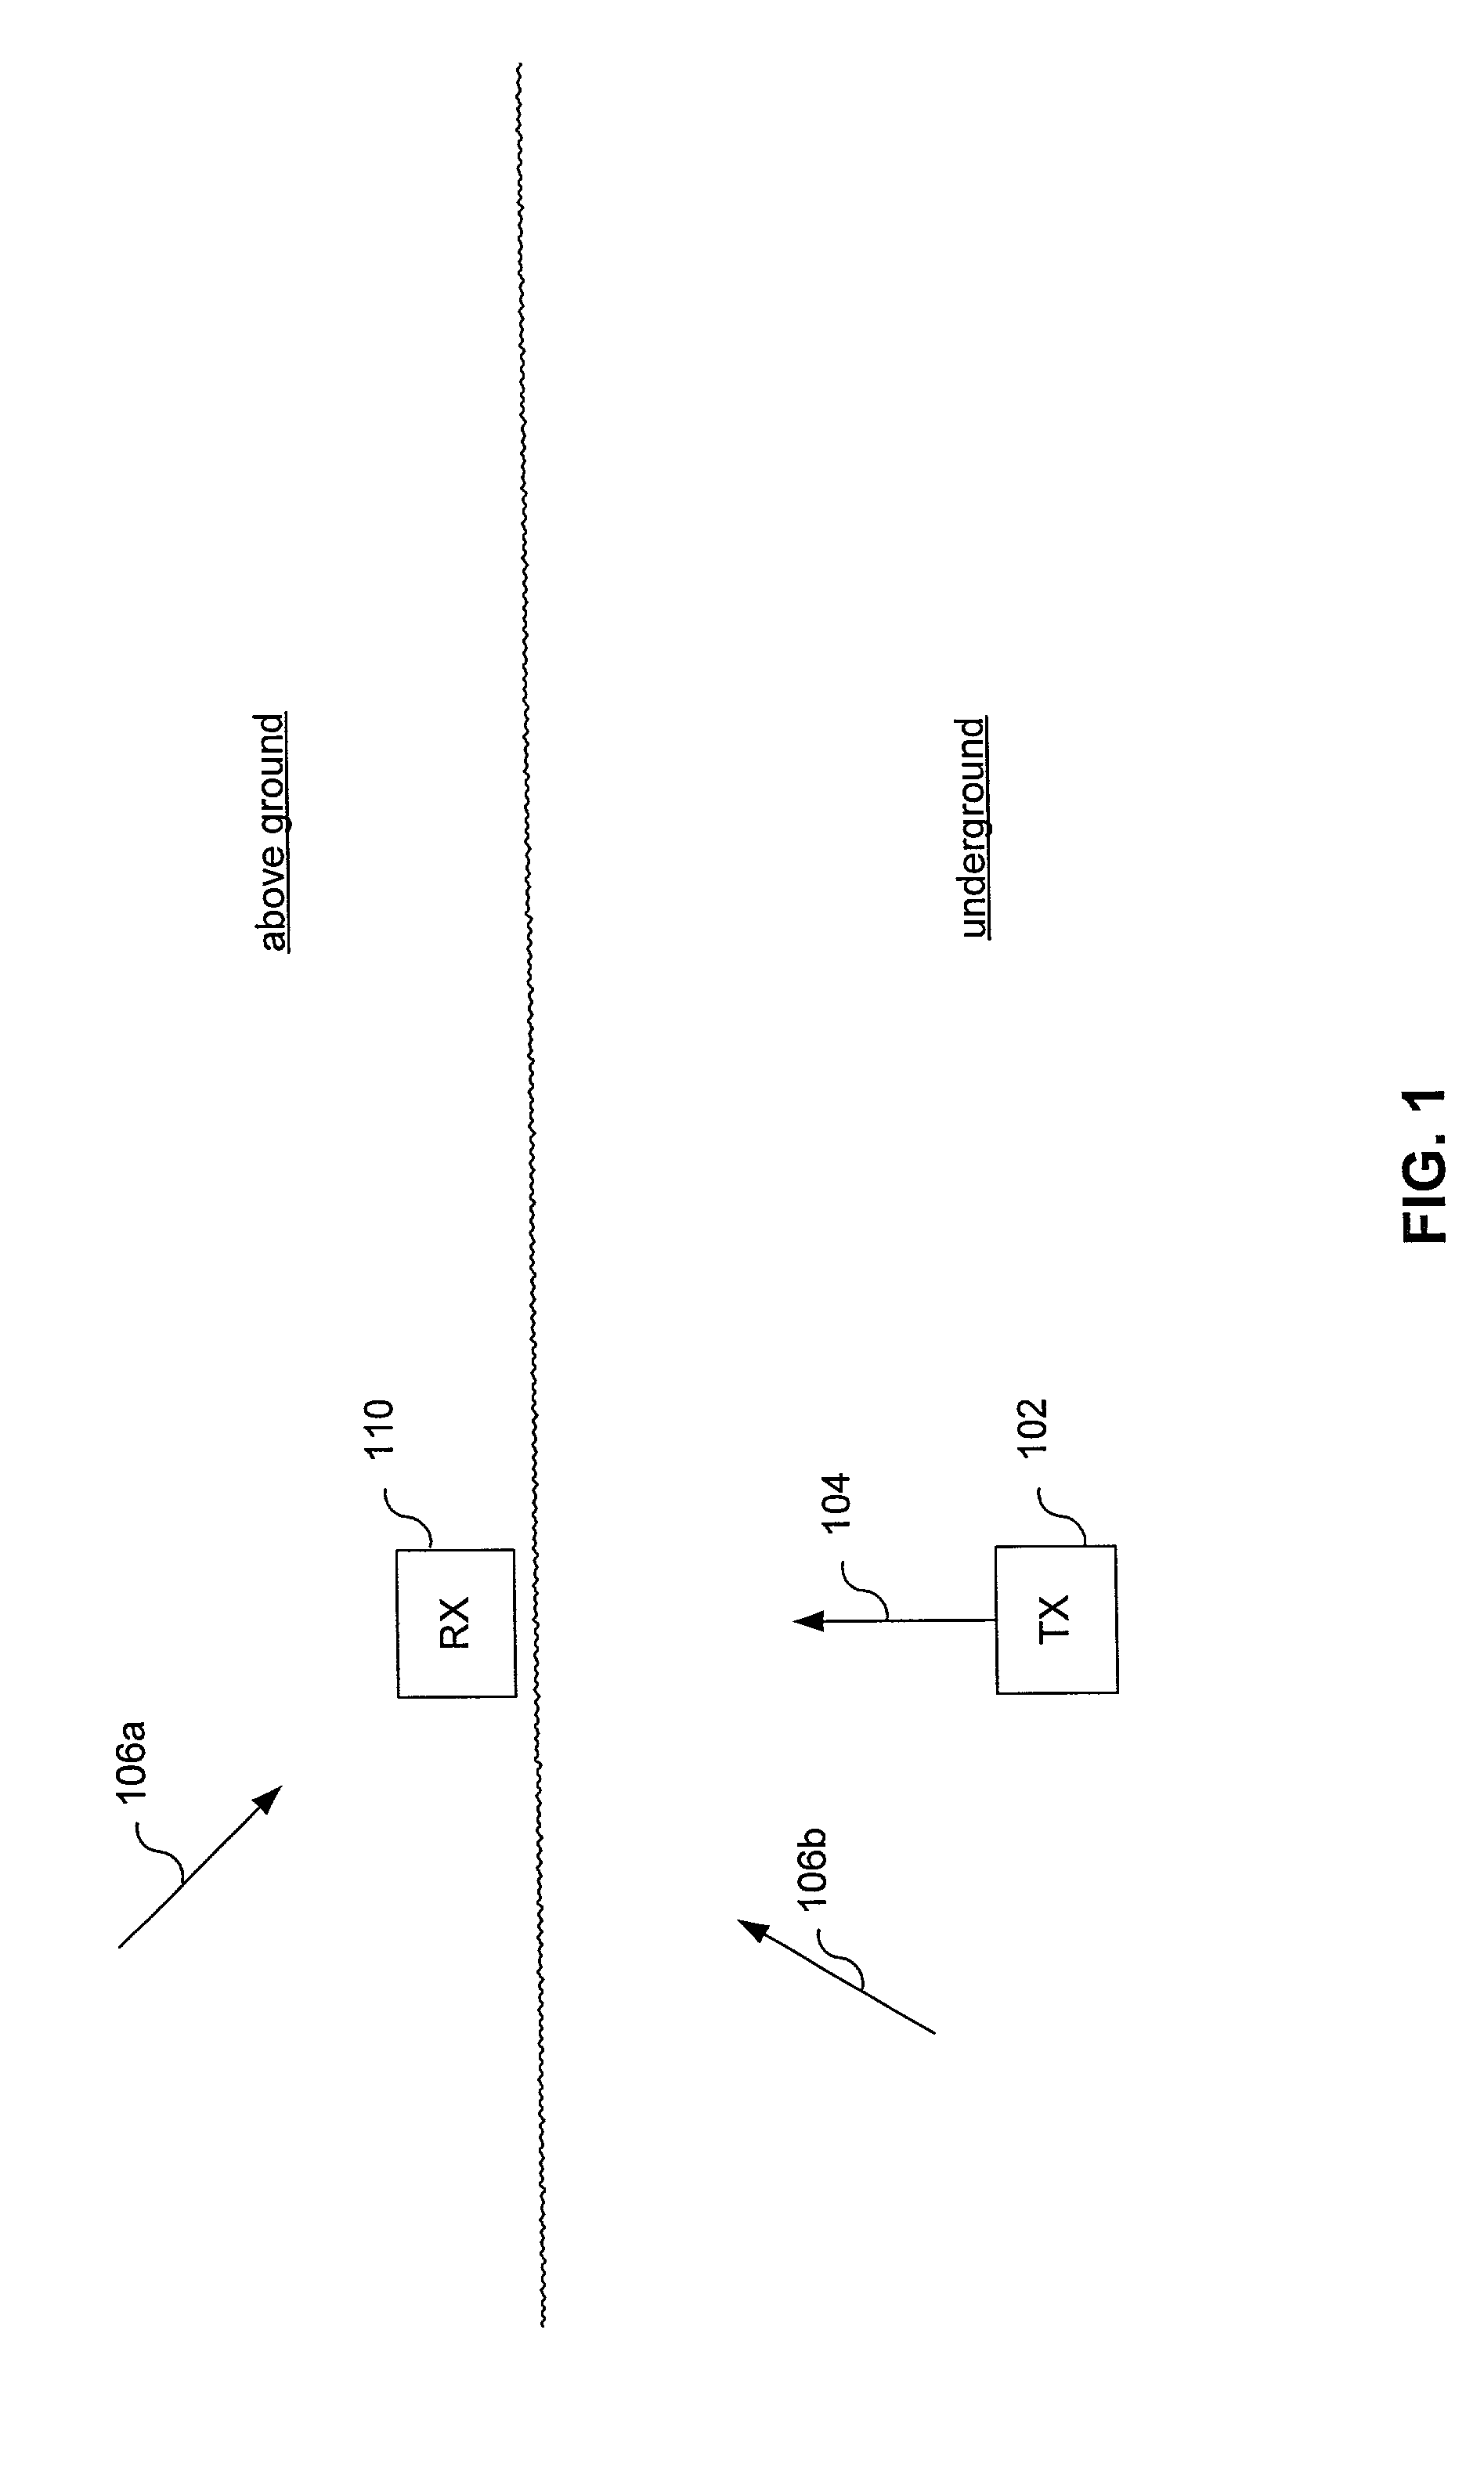 Encoding scheme for producing magnetic field signals having desired spectral characteristics